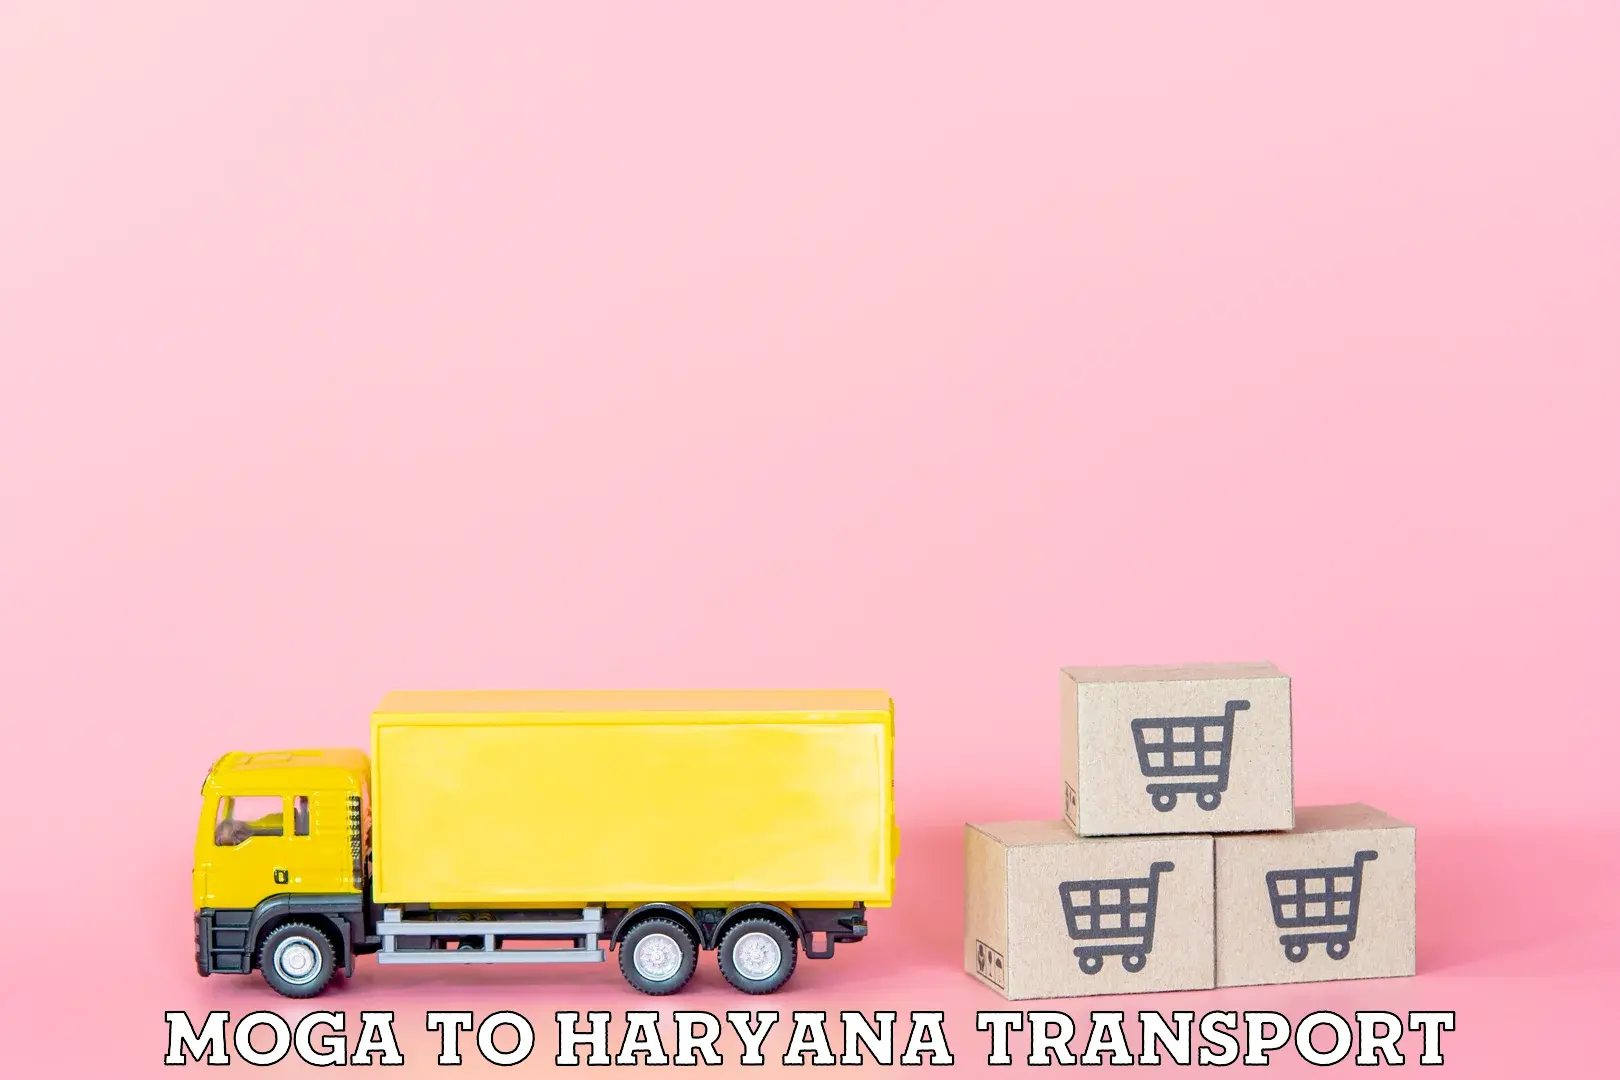 Express transport services Moga to Sonipat